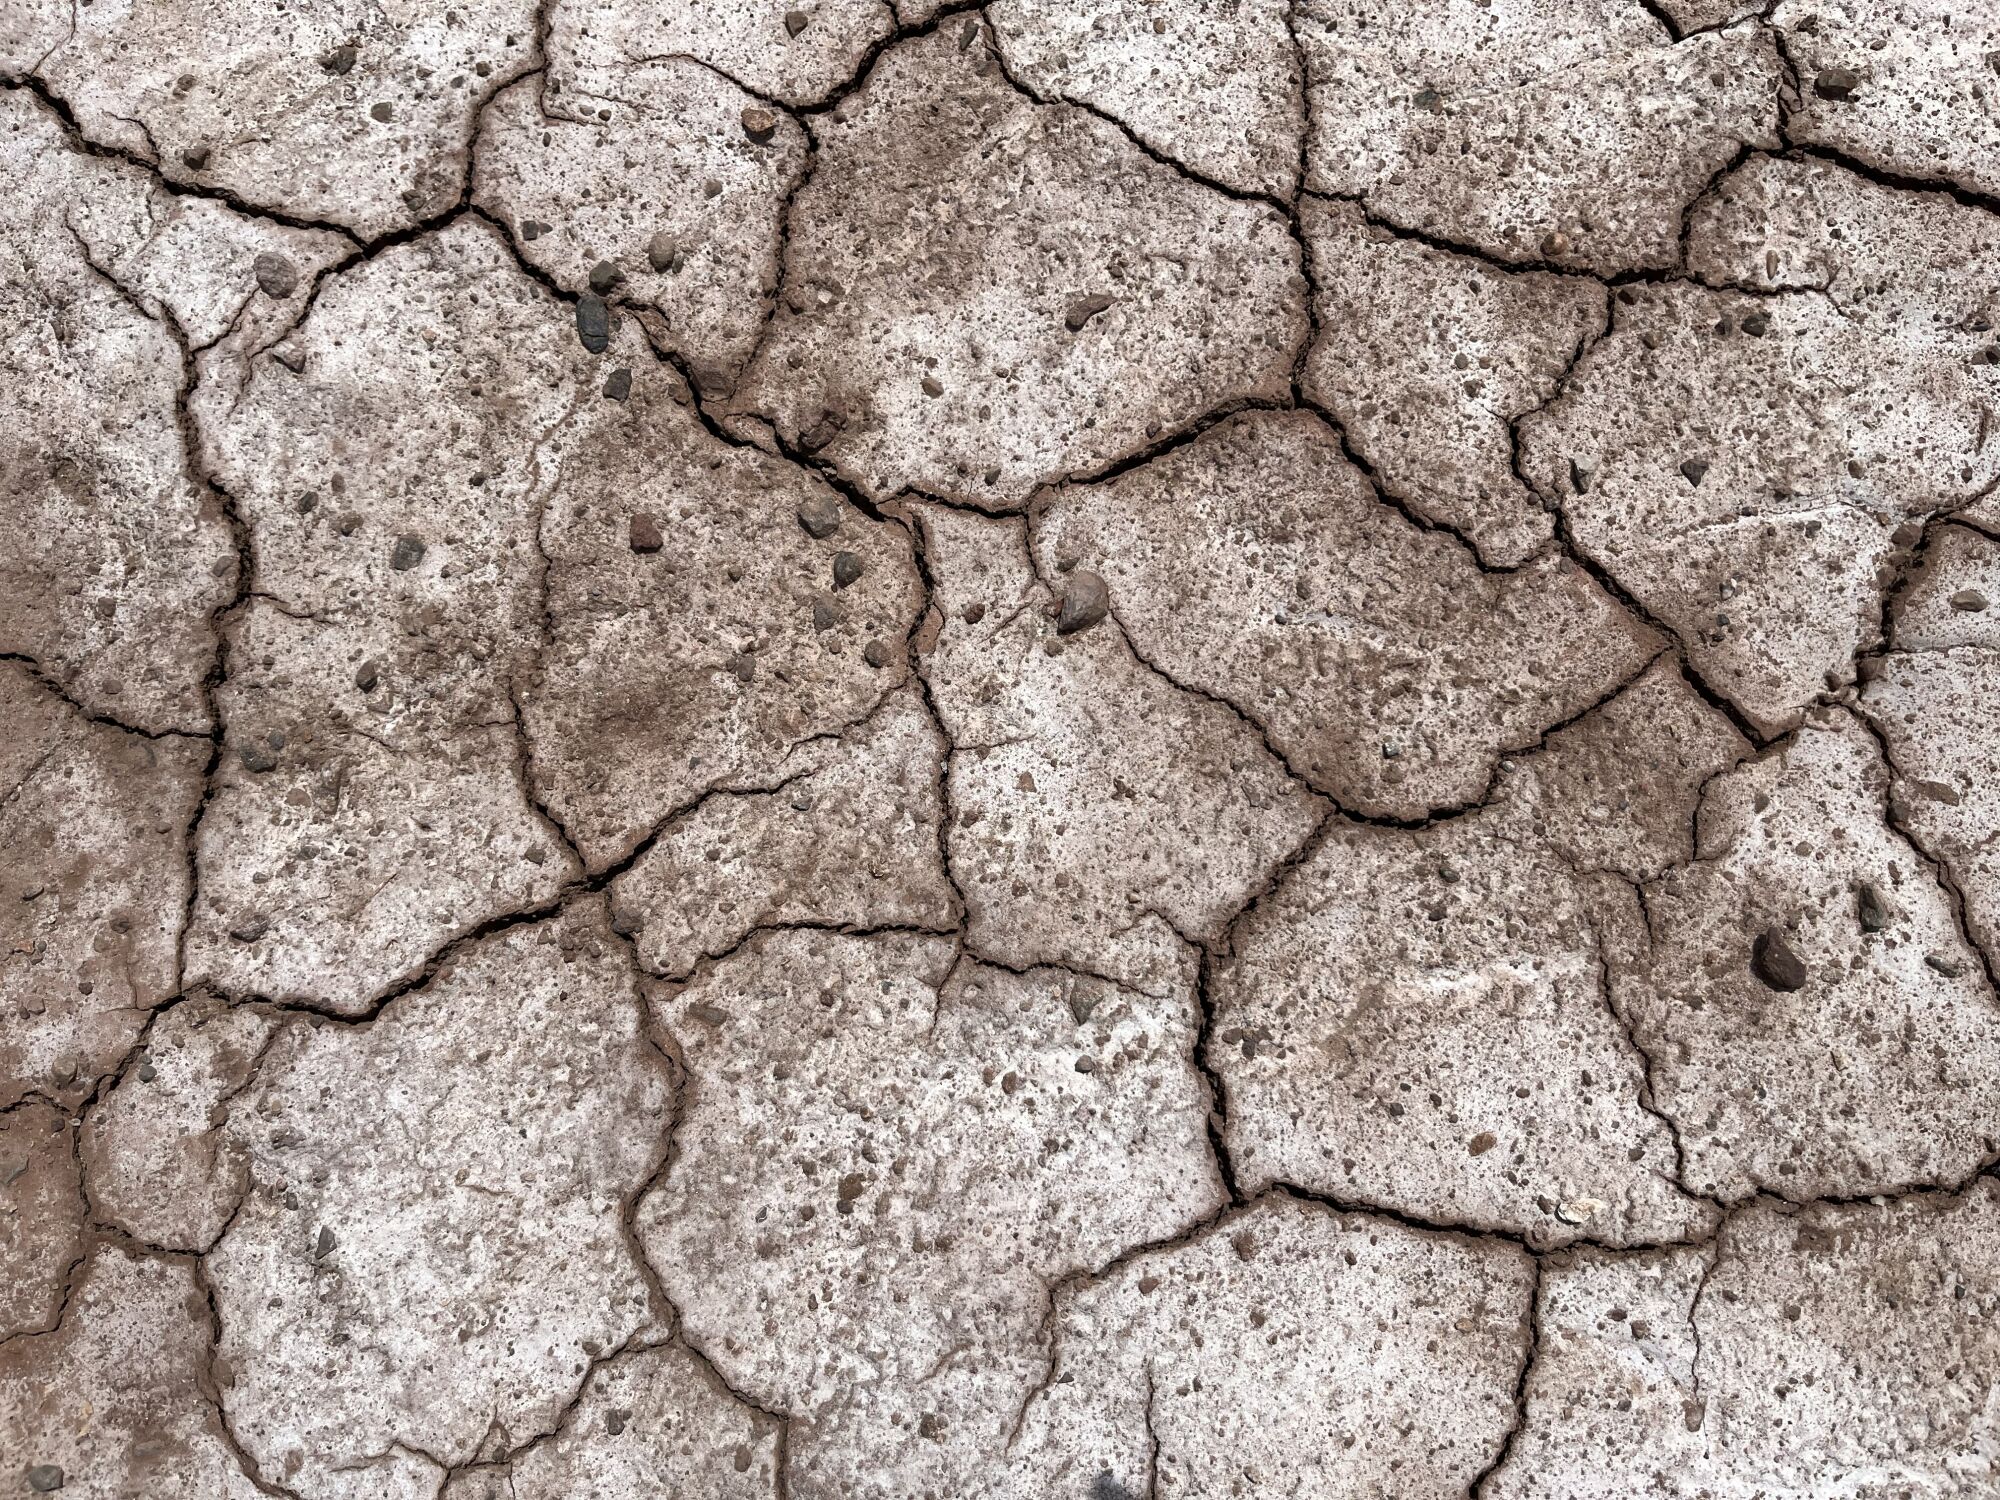 A horizontal detail of cracked, dry earth.